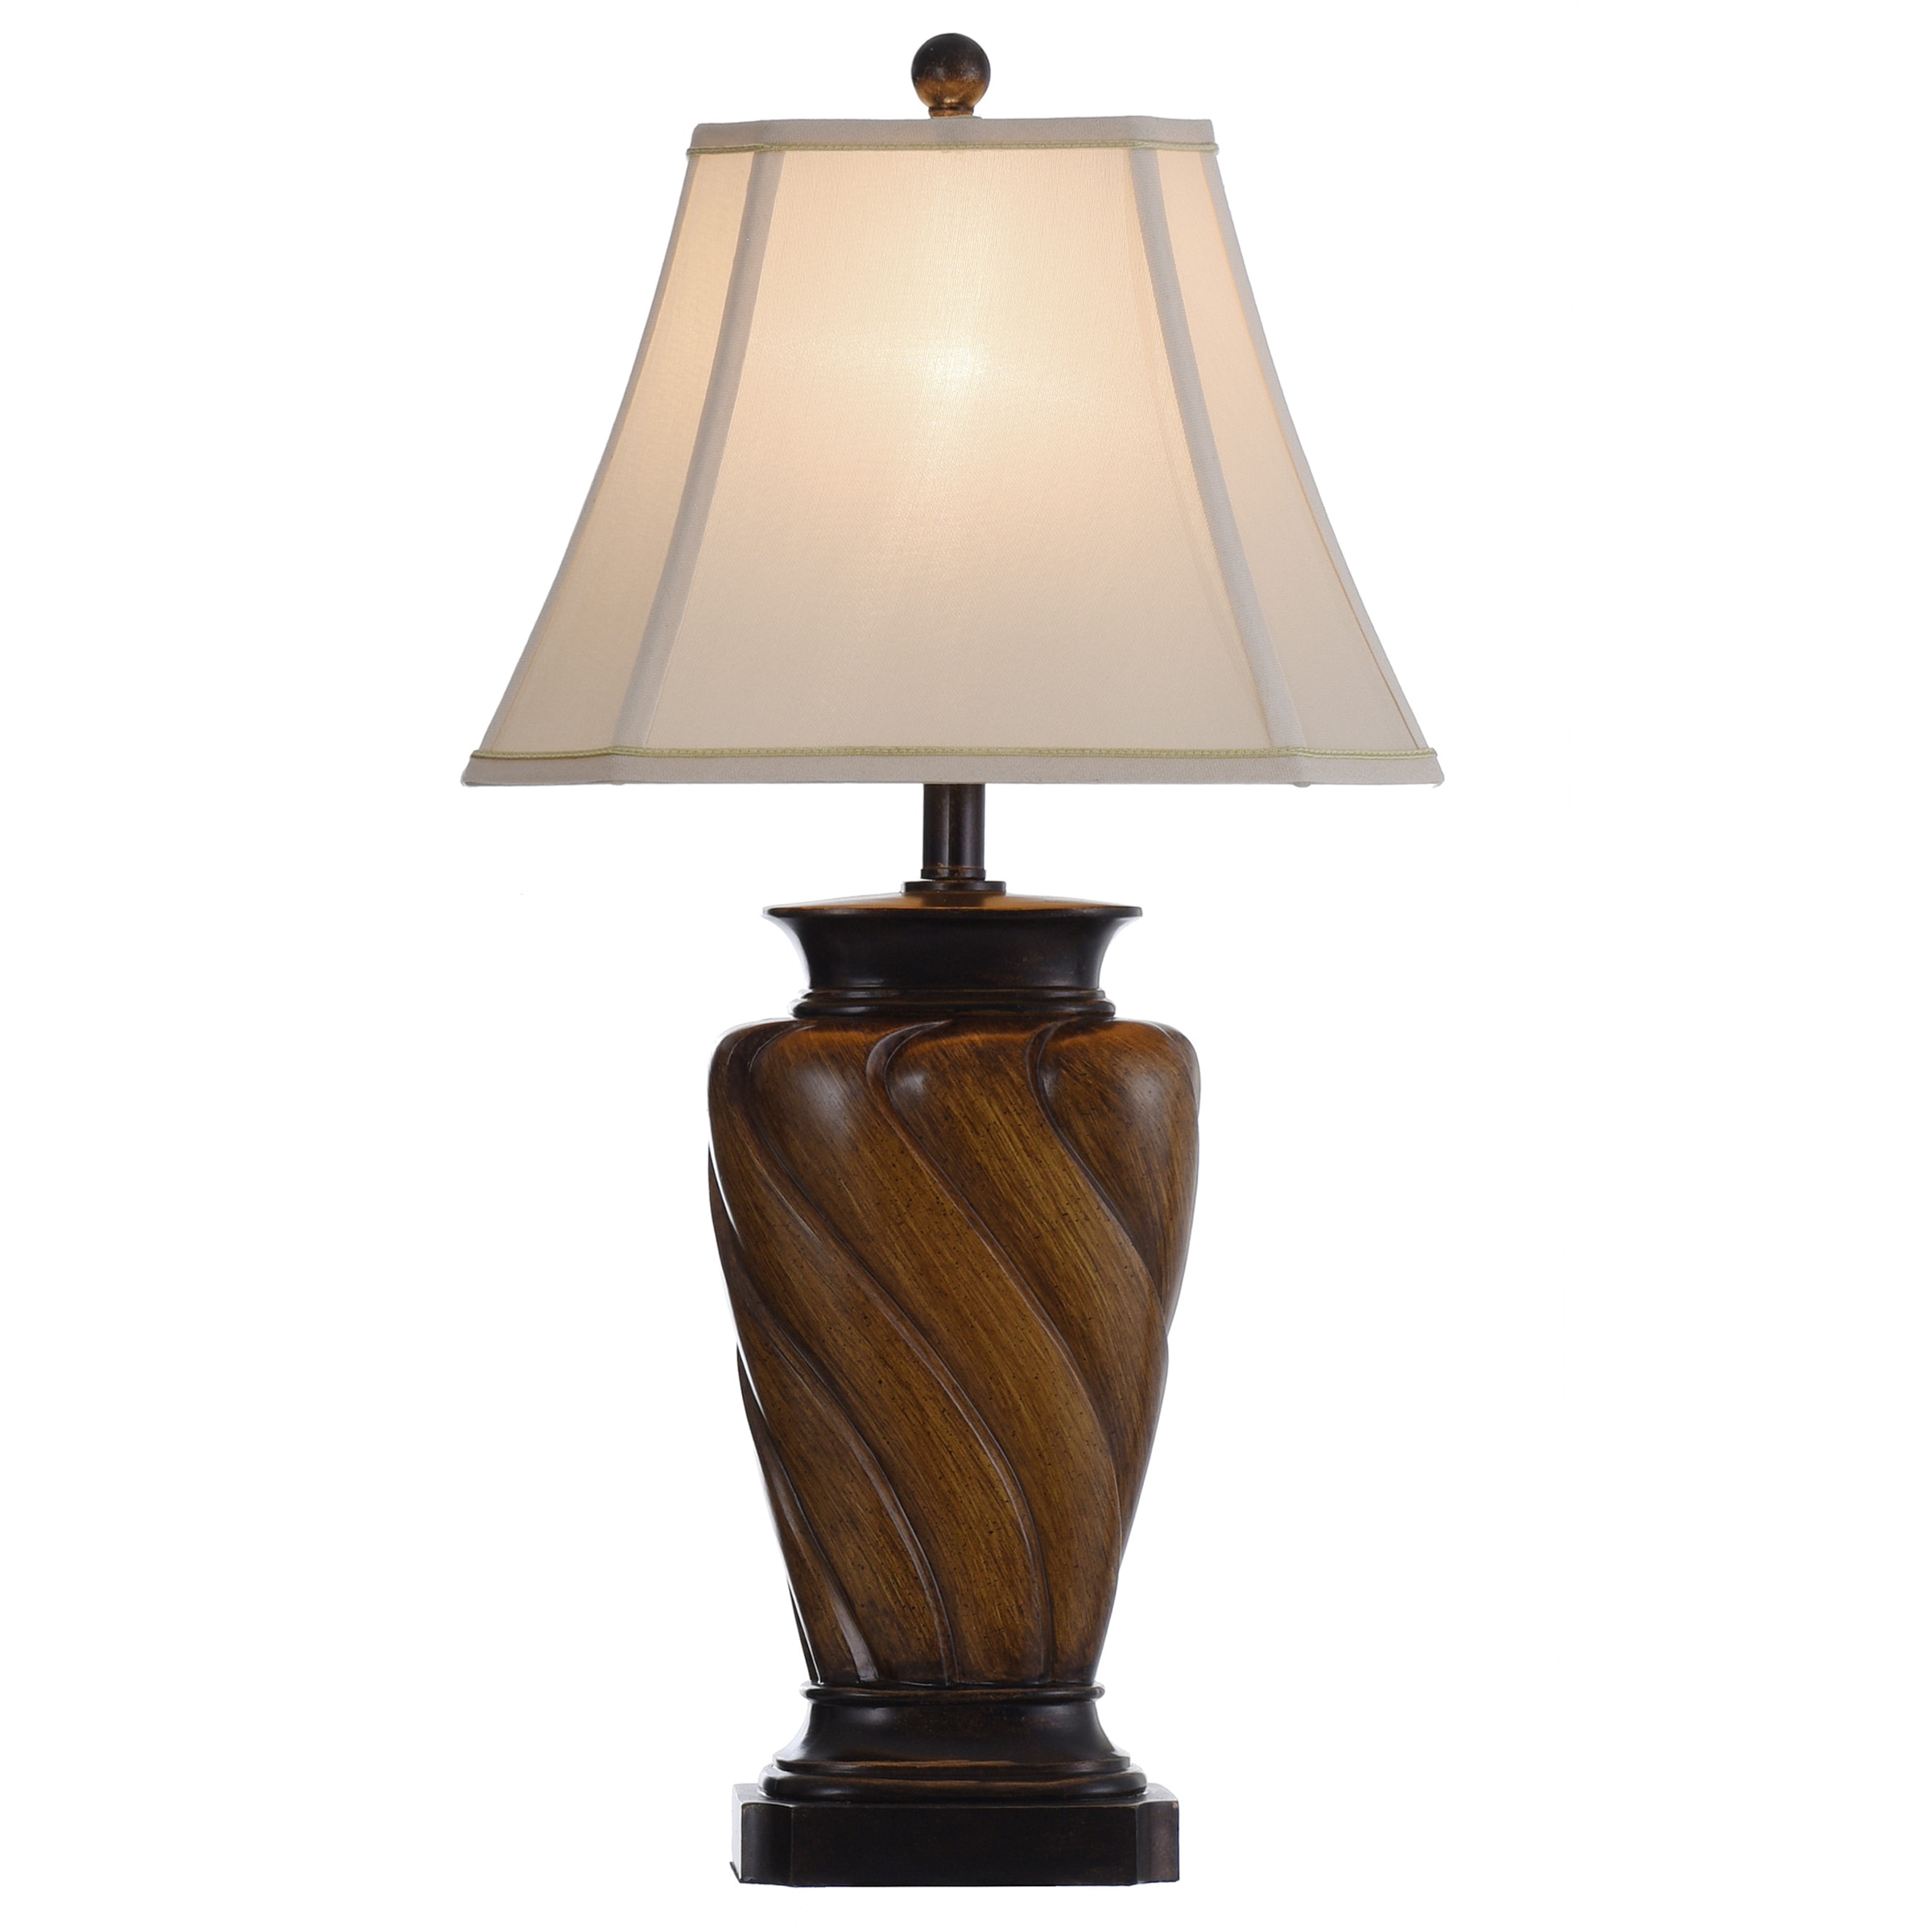 StyleCraft Home Collection 30-in Toffee Wood Table Lamp with